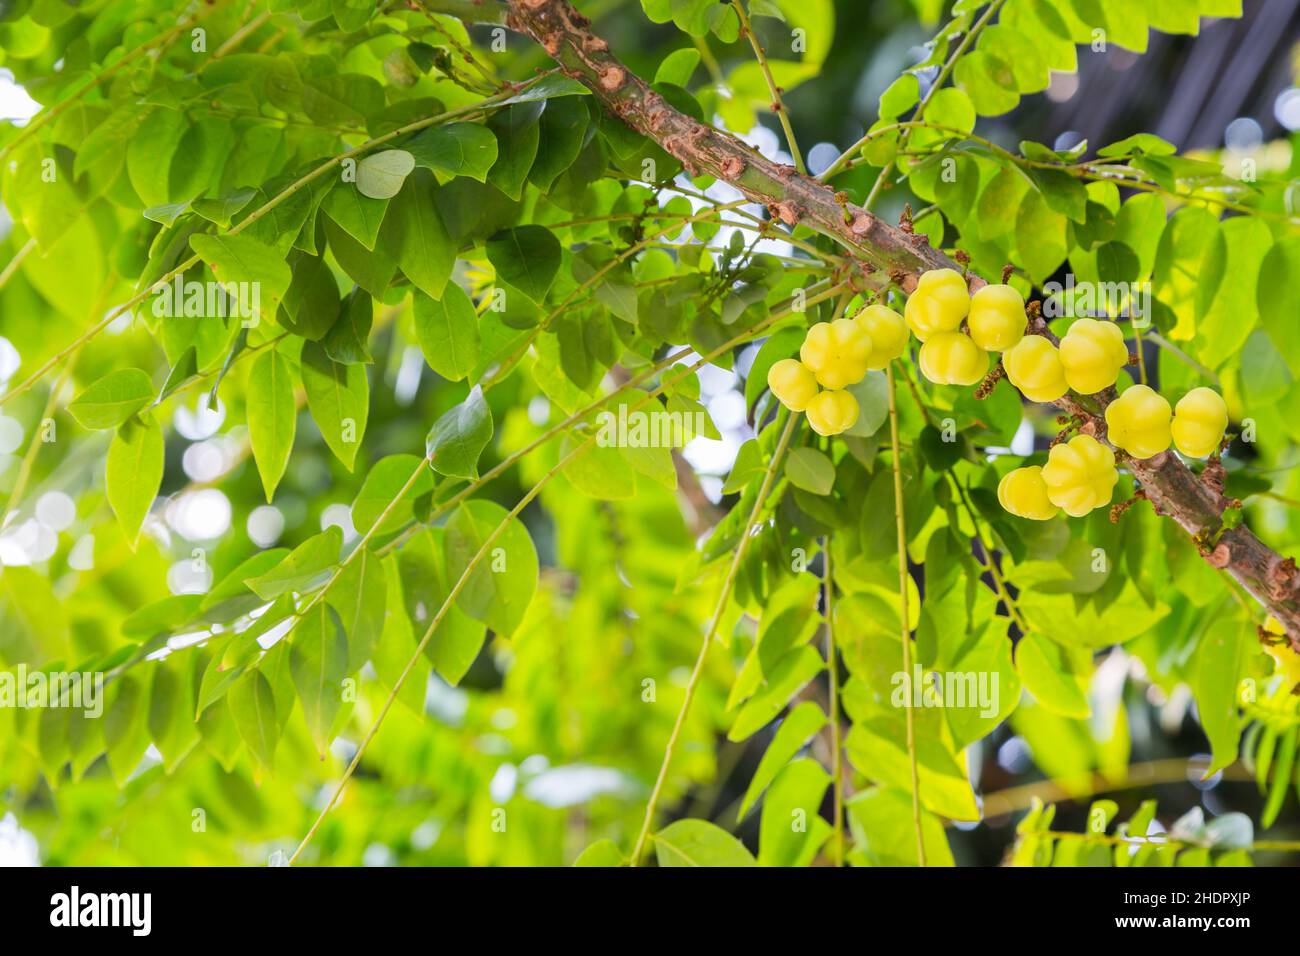 Star gooseberry tree on green leaf background Stock Photo